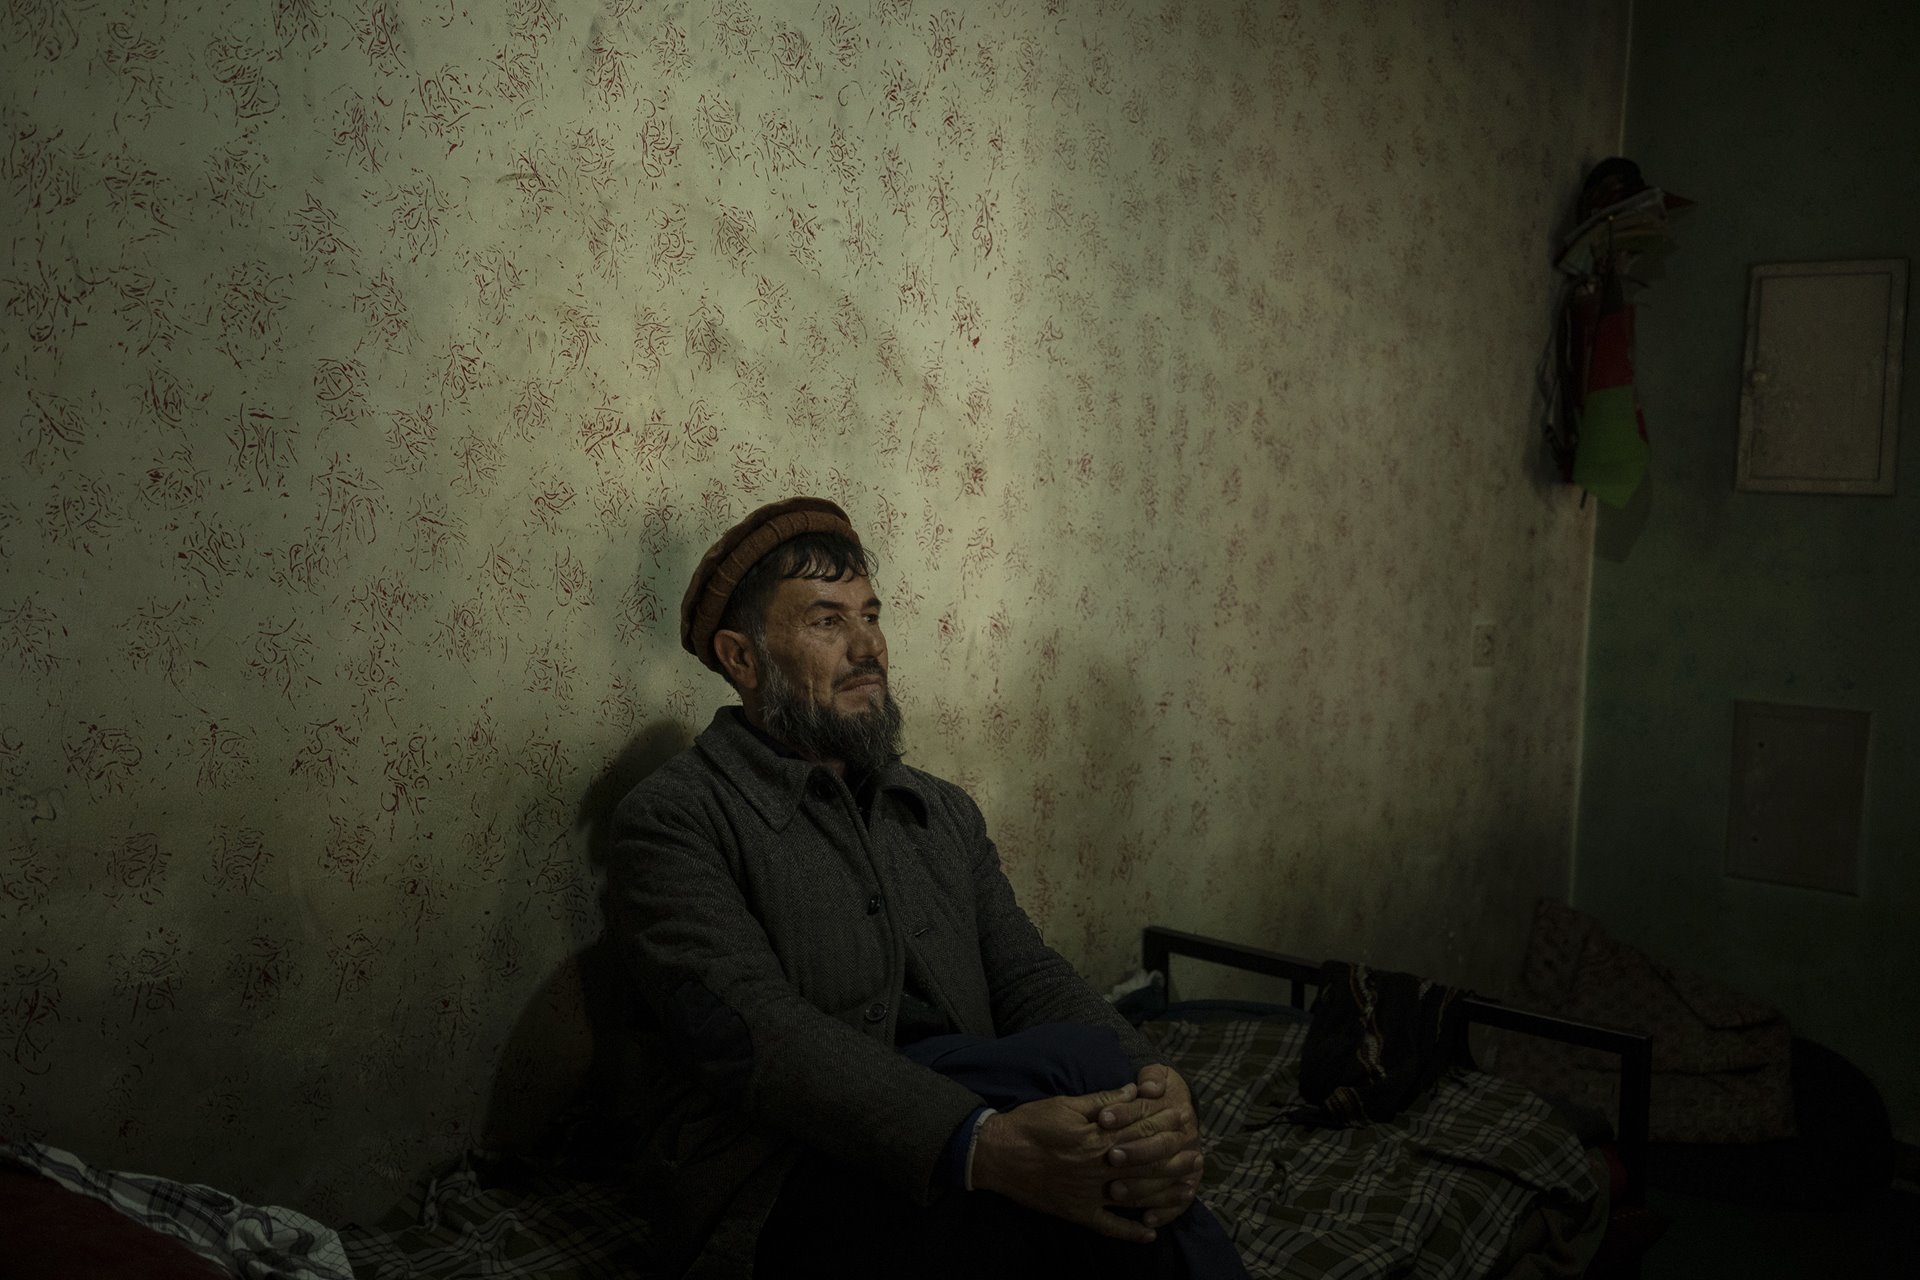 Abdul Fatah sits on his bed inside the Ariana Cinema, in Kabul, Afghanistan. Fatah lives in the cinema, where he works as a security guard.